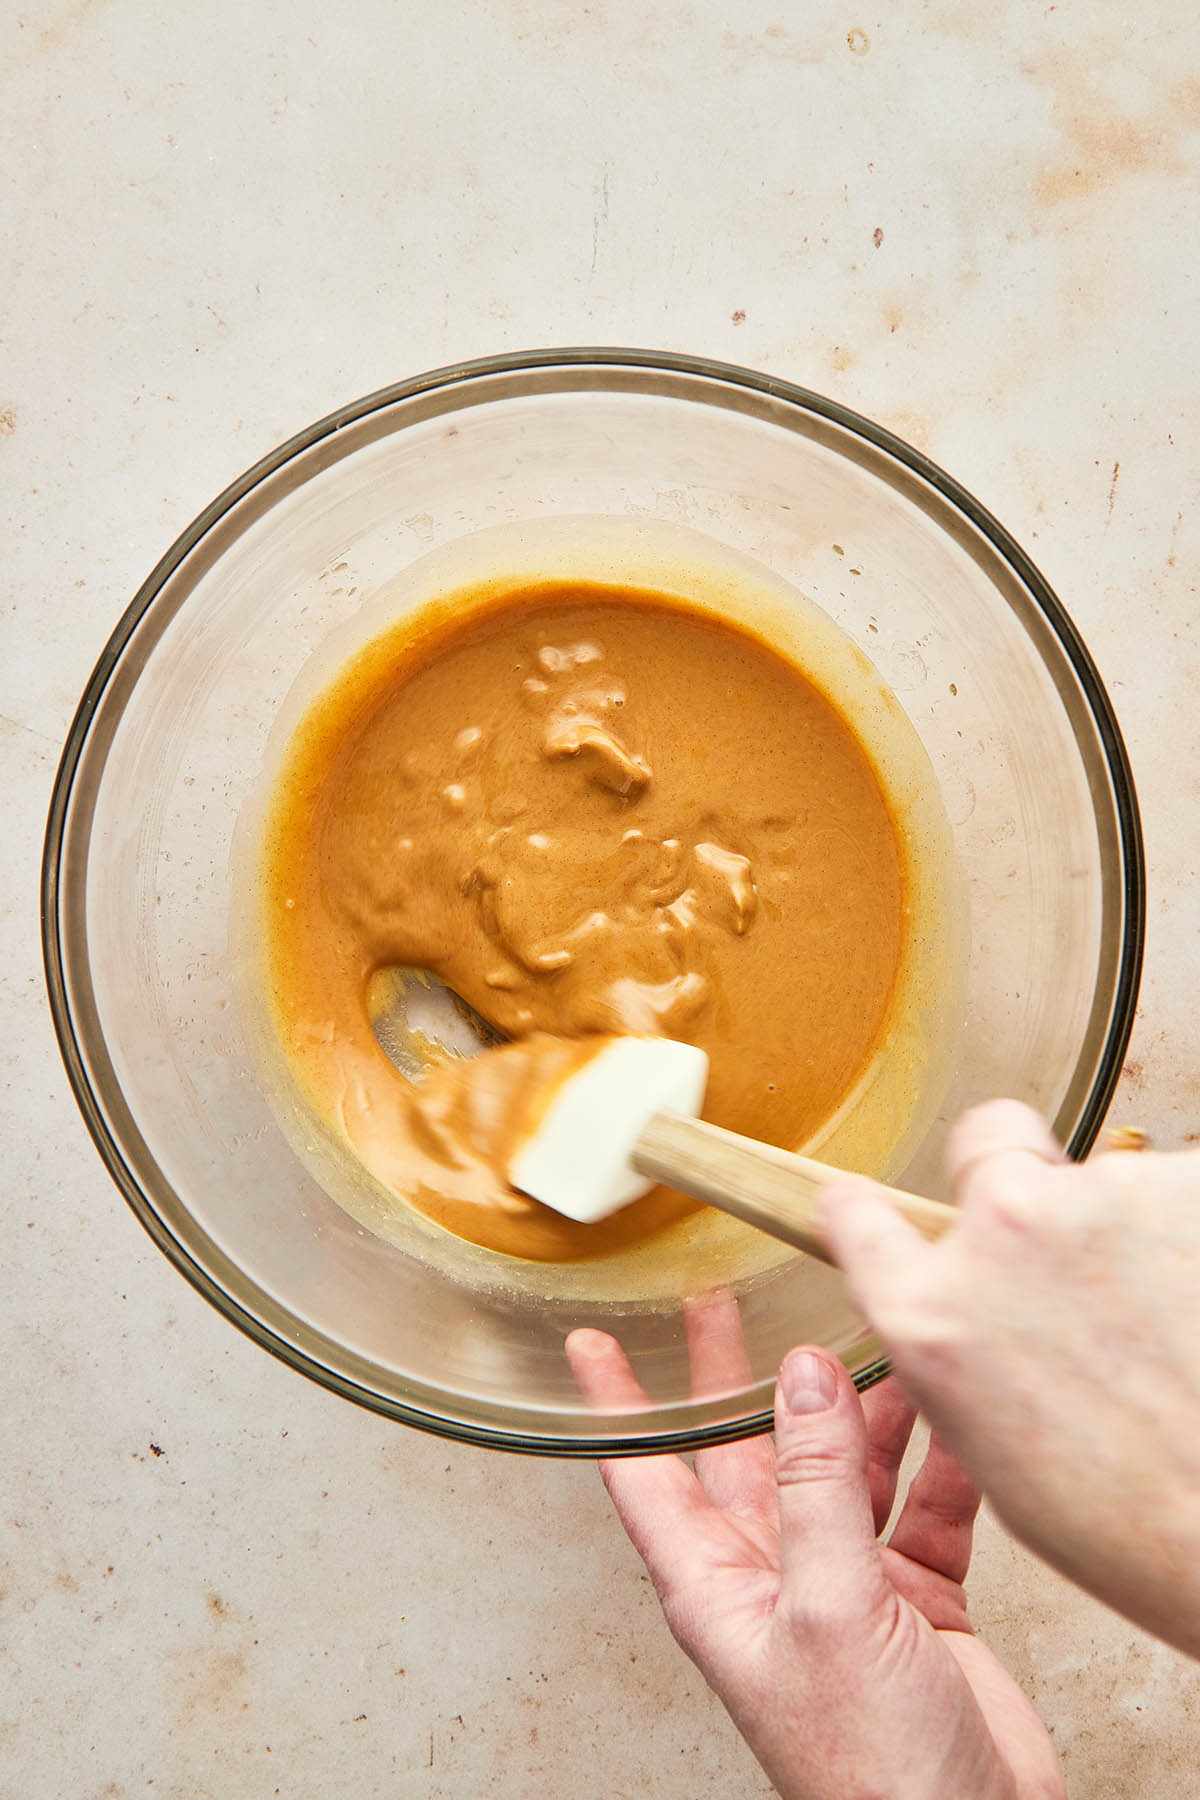 A hand stirring peanut butter in a glass micing bowl using a rubber spatula.